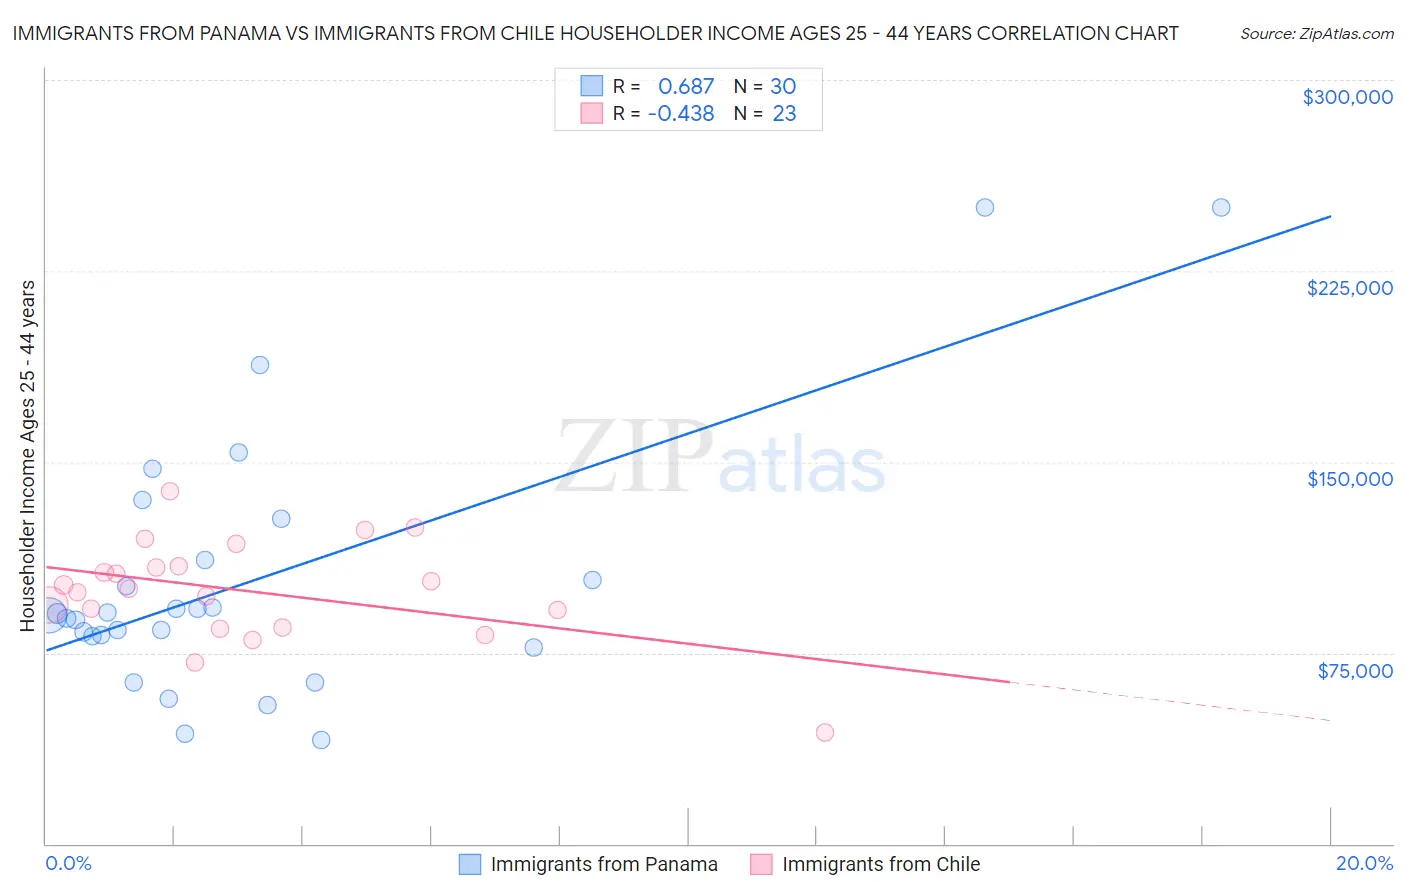 Immigrants from Panama vs Immigrants from Chile Householder Income Ages 25 - 44 years